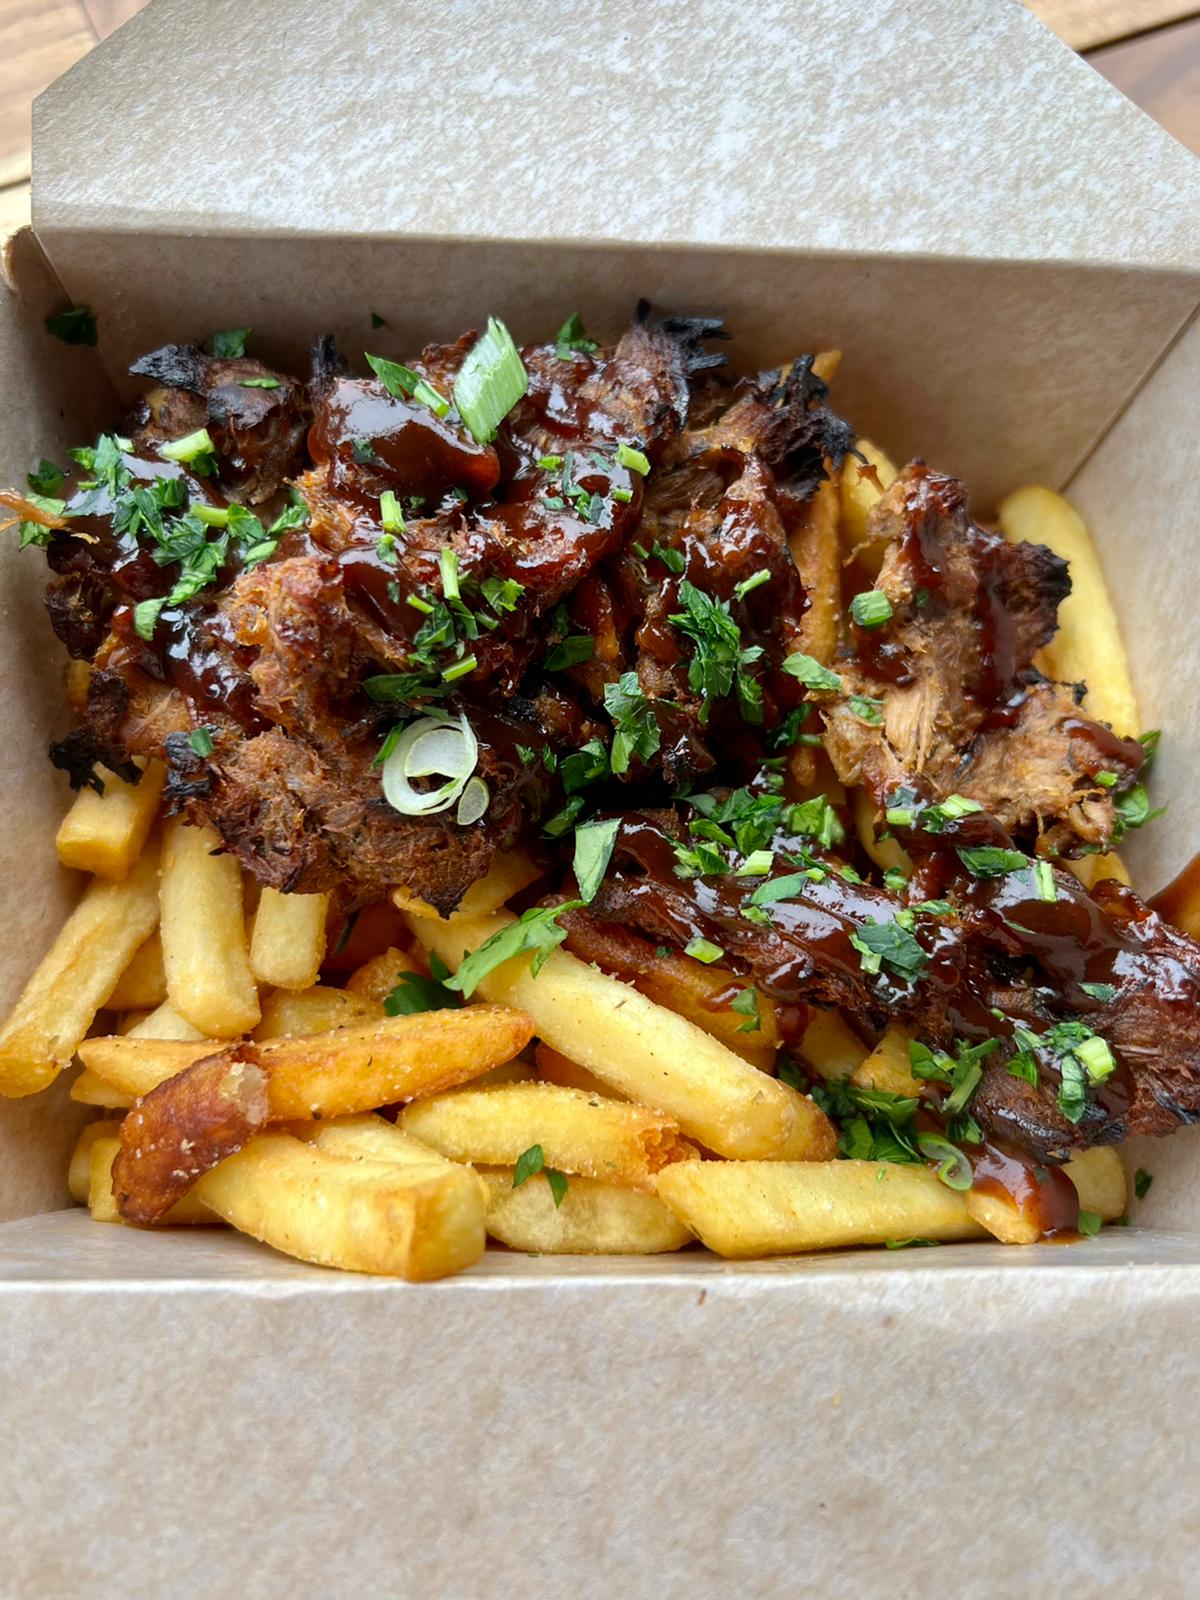 The French fries and bbq pulled pork